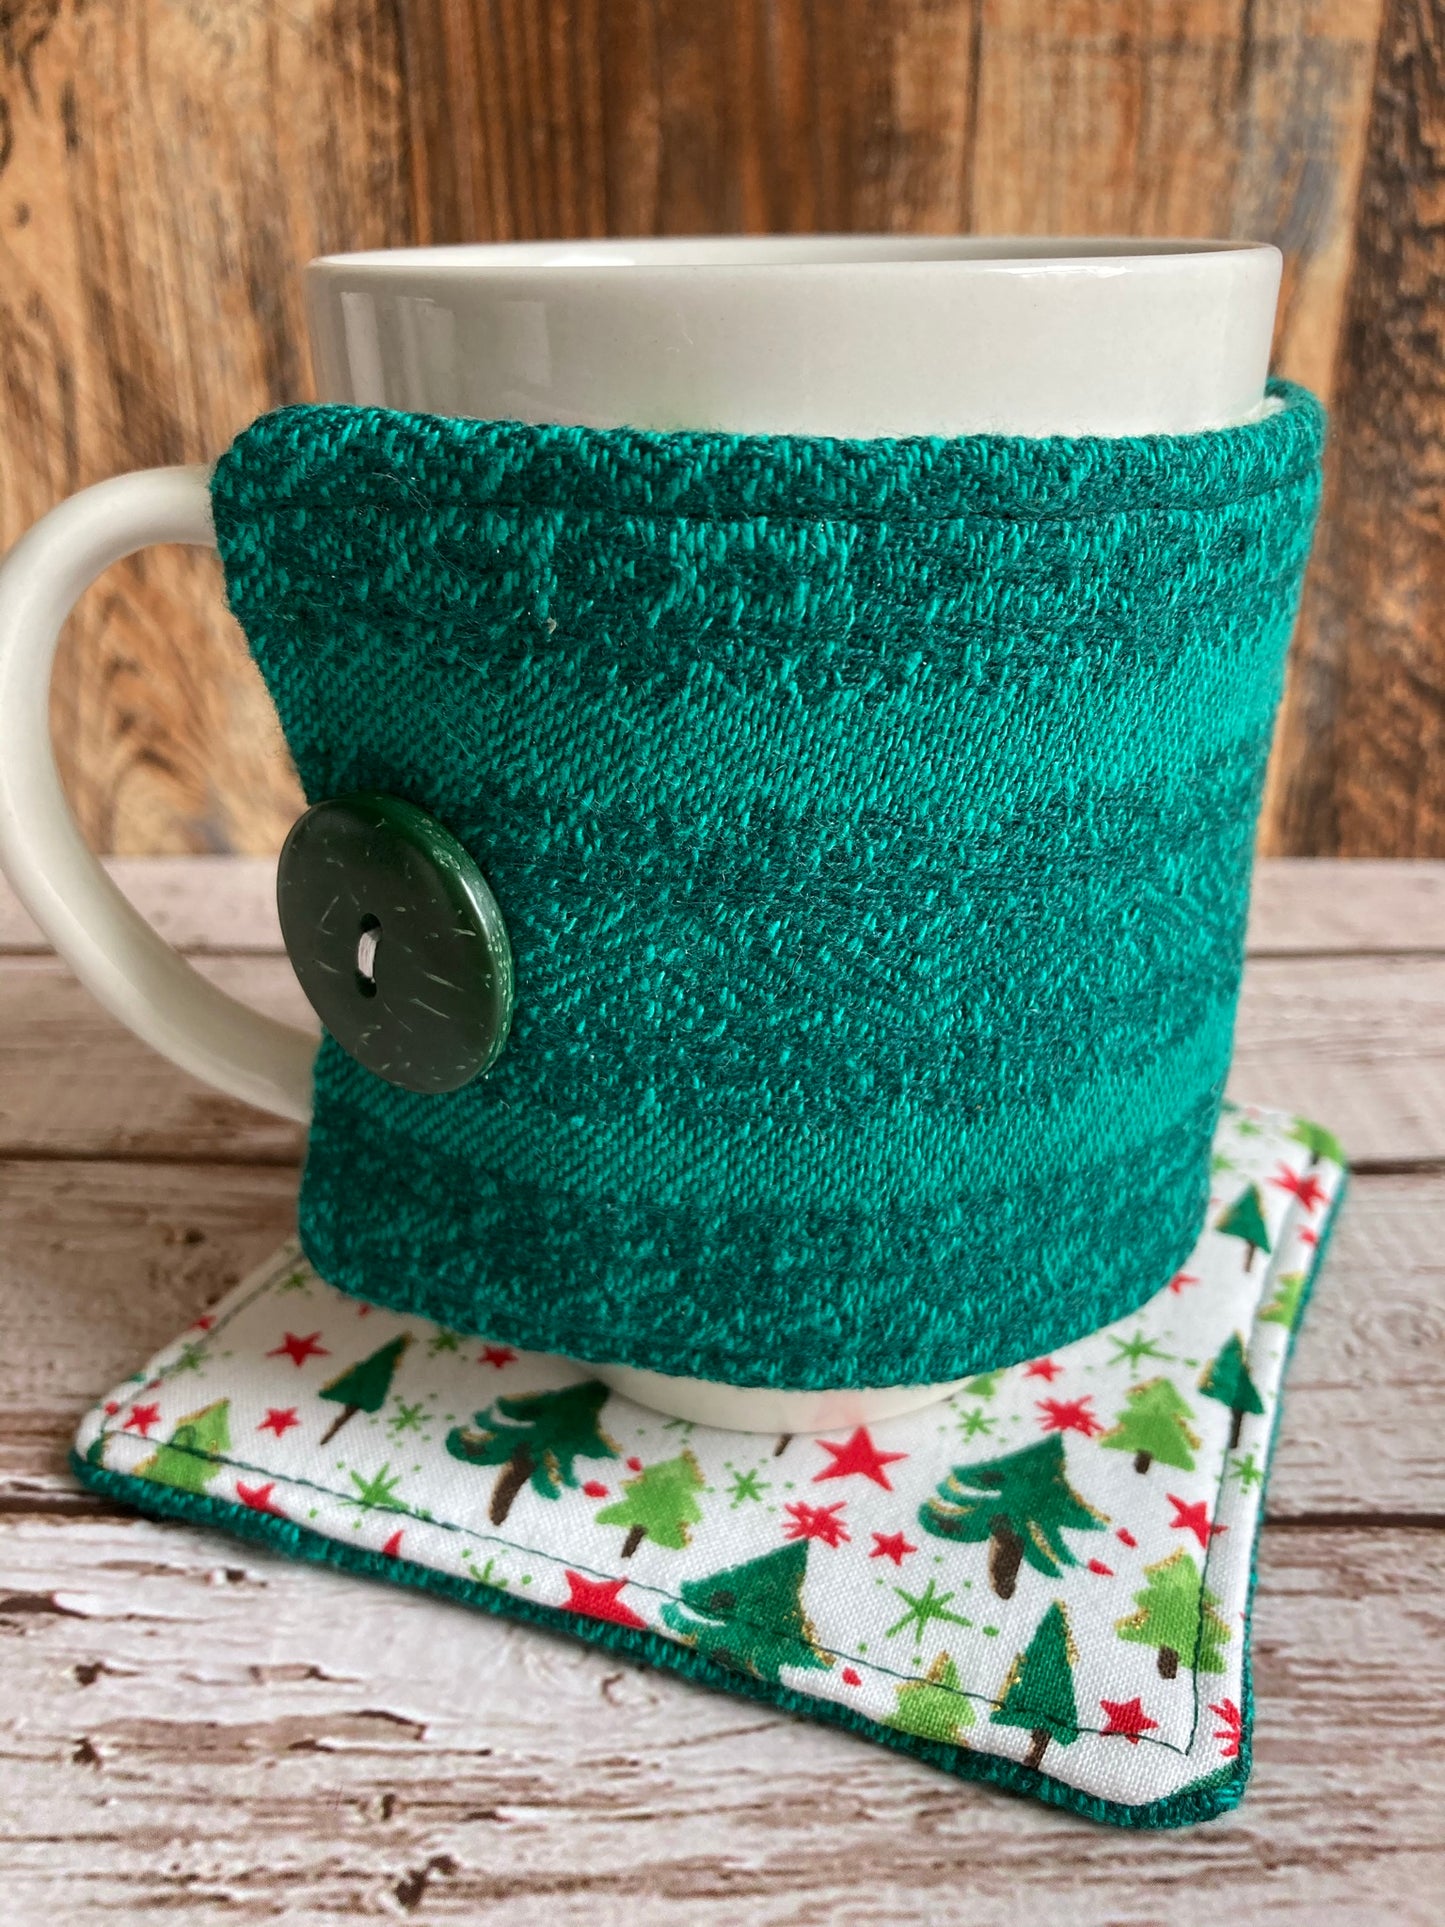 Christmas Trees Reversible Mug and Cup Cozy (also fits pints of ice cream)